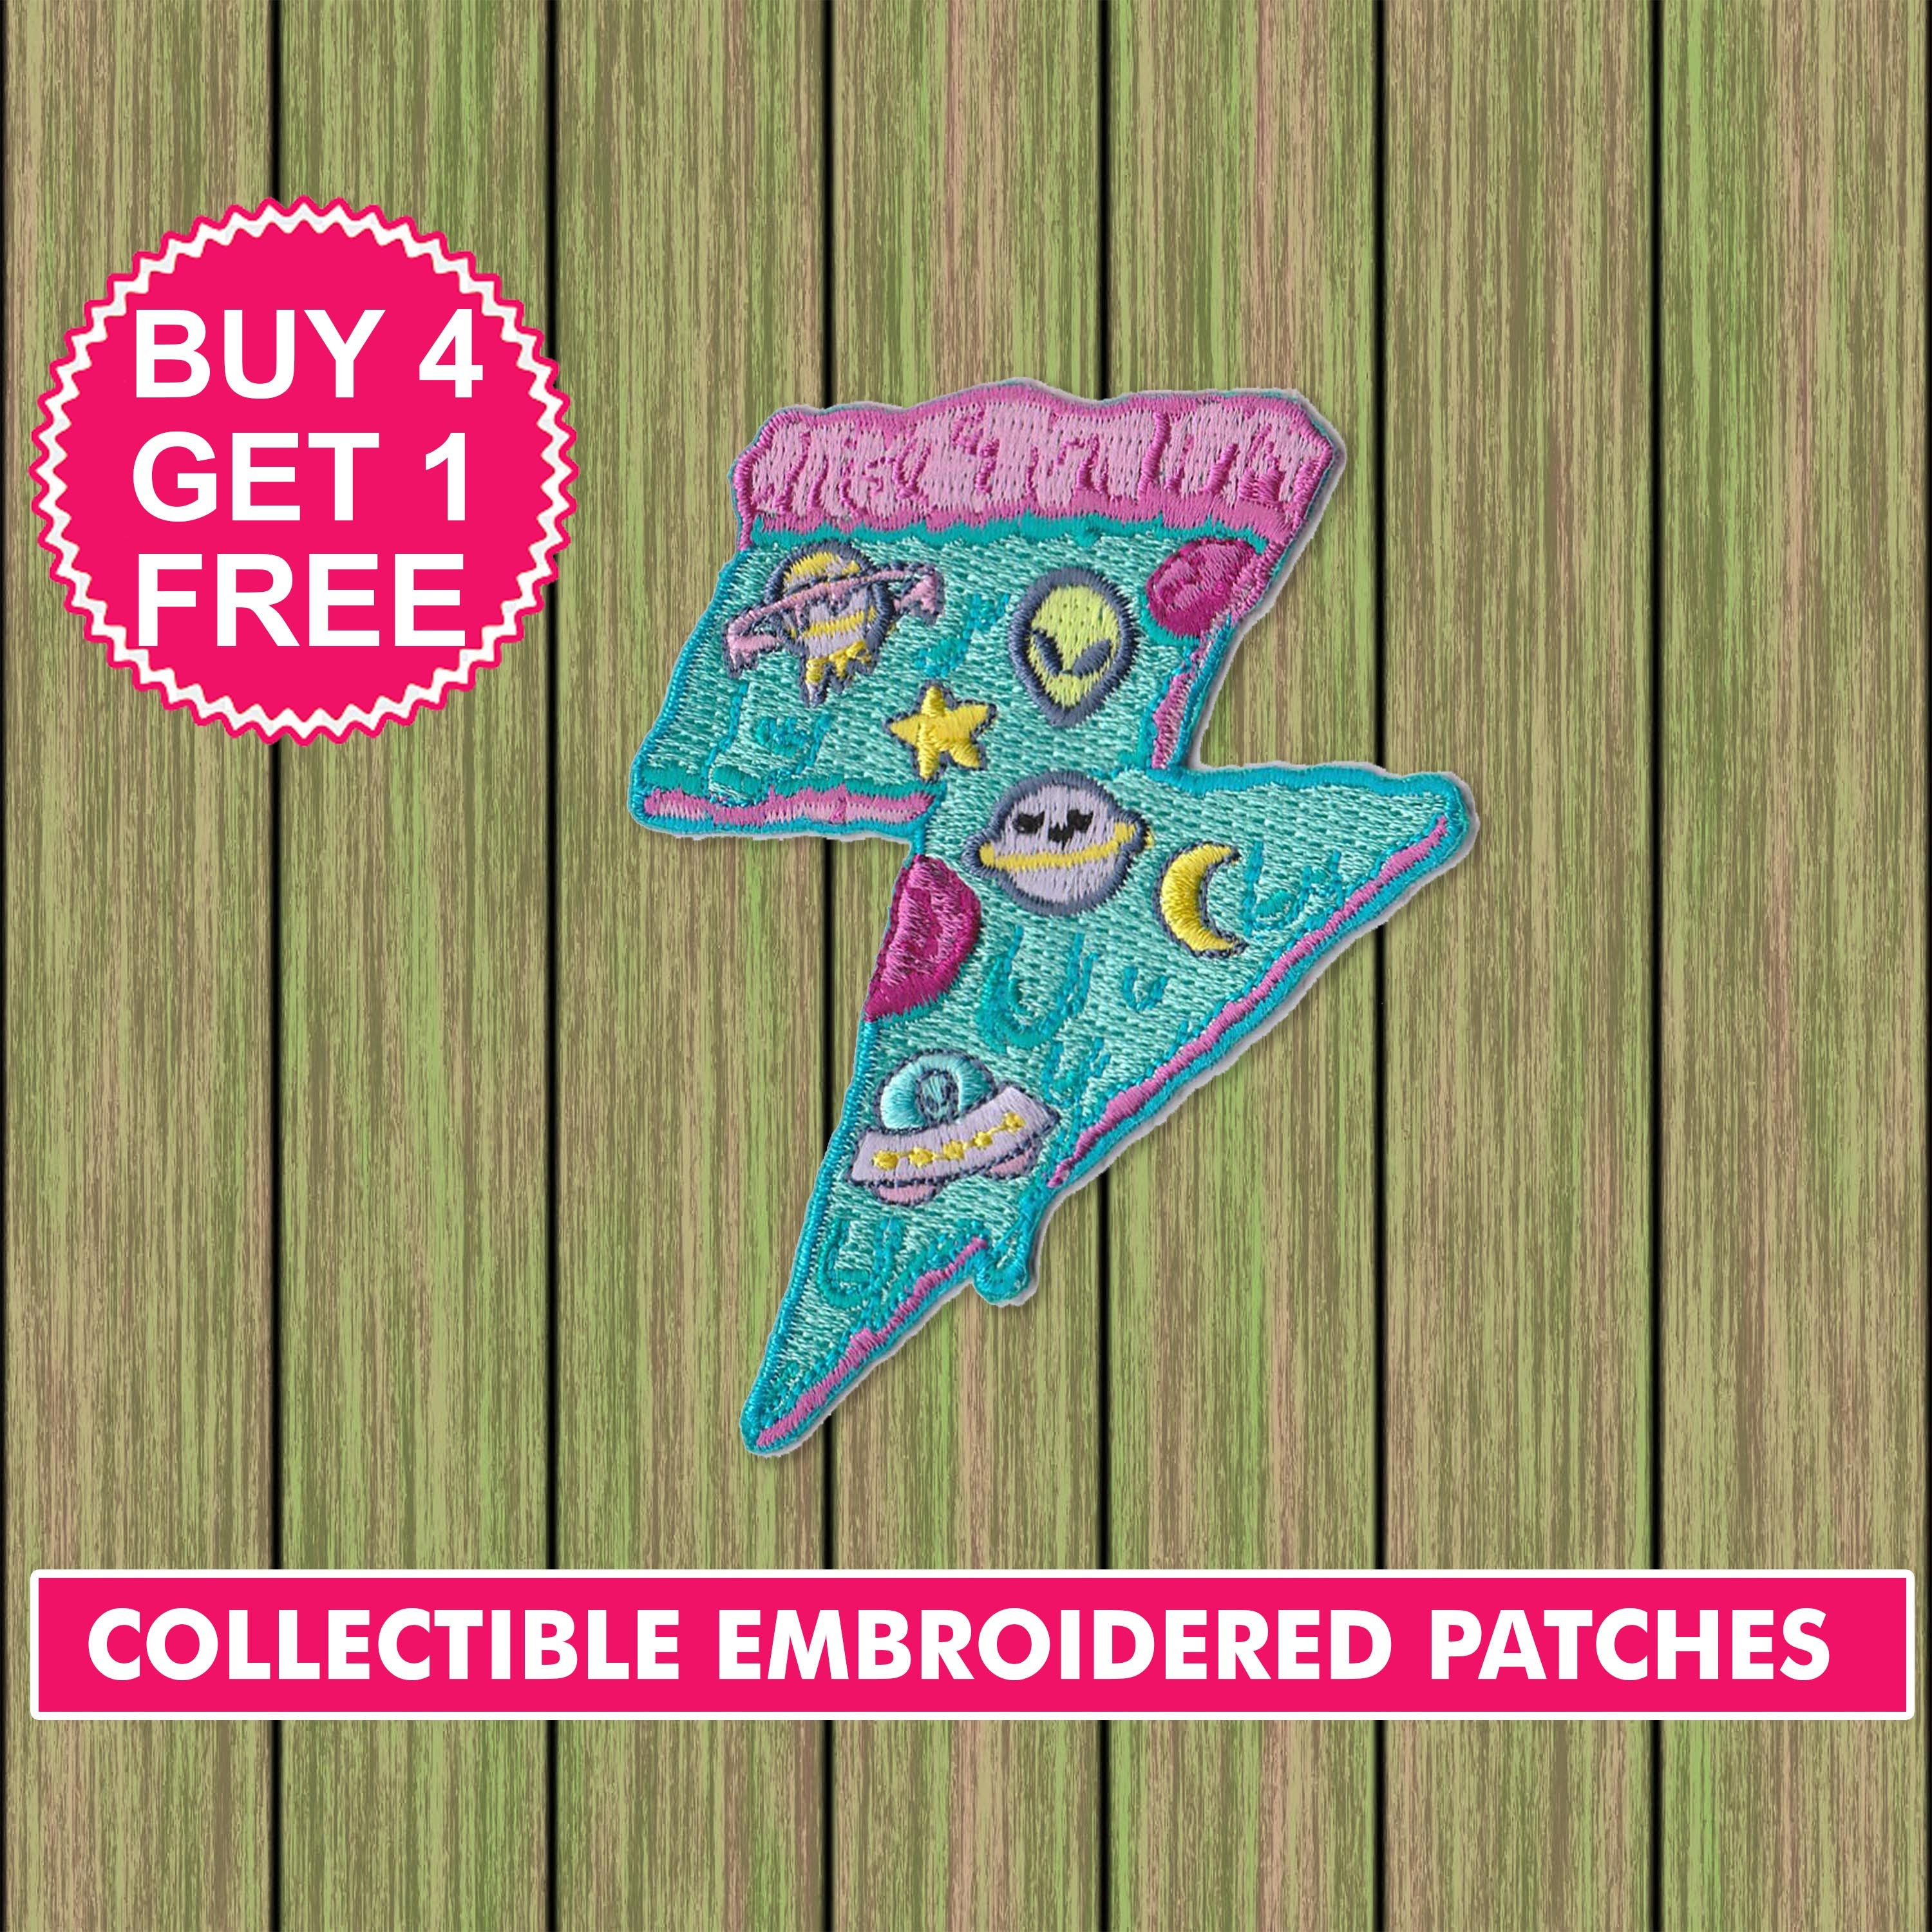 Pizza Patch - Iron On Patches - Chenille Patches